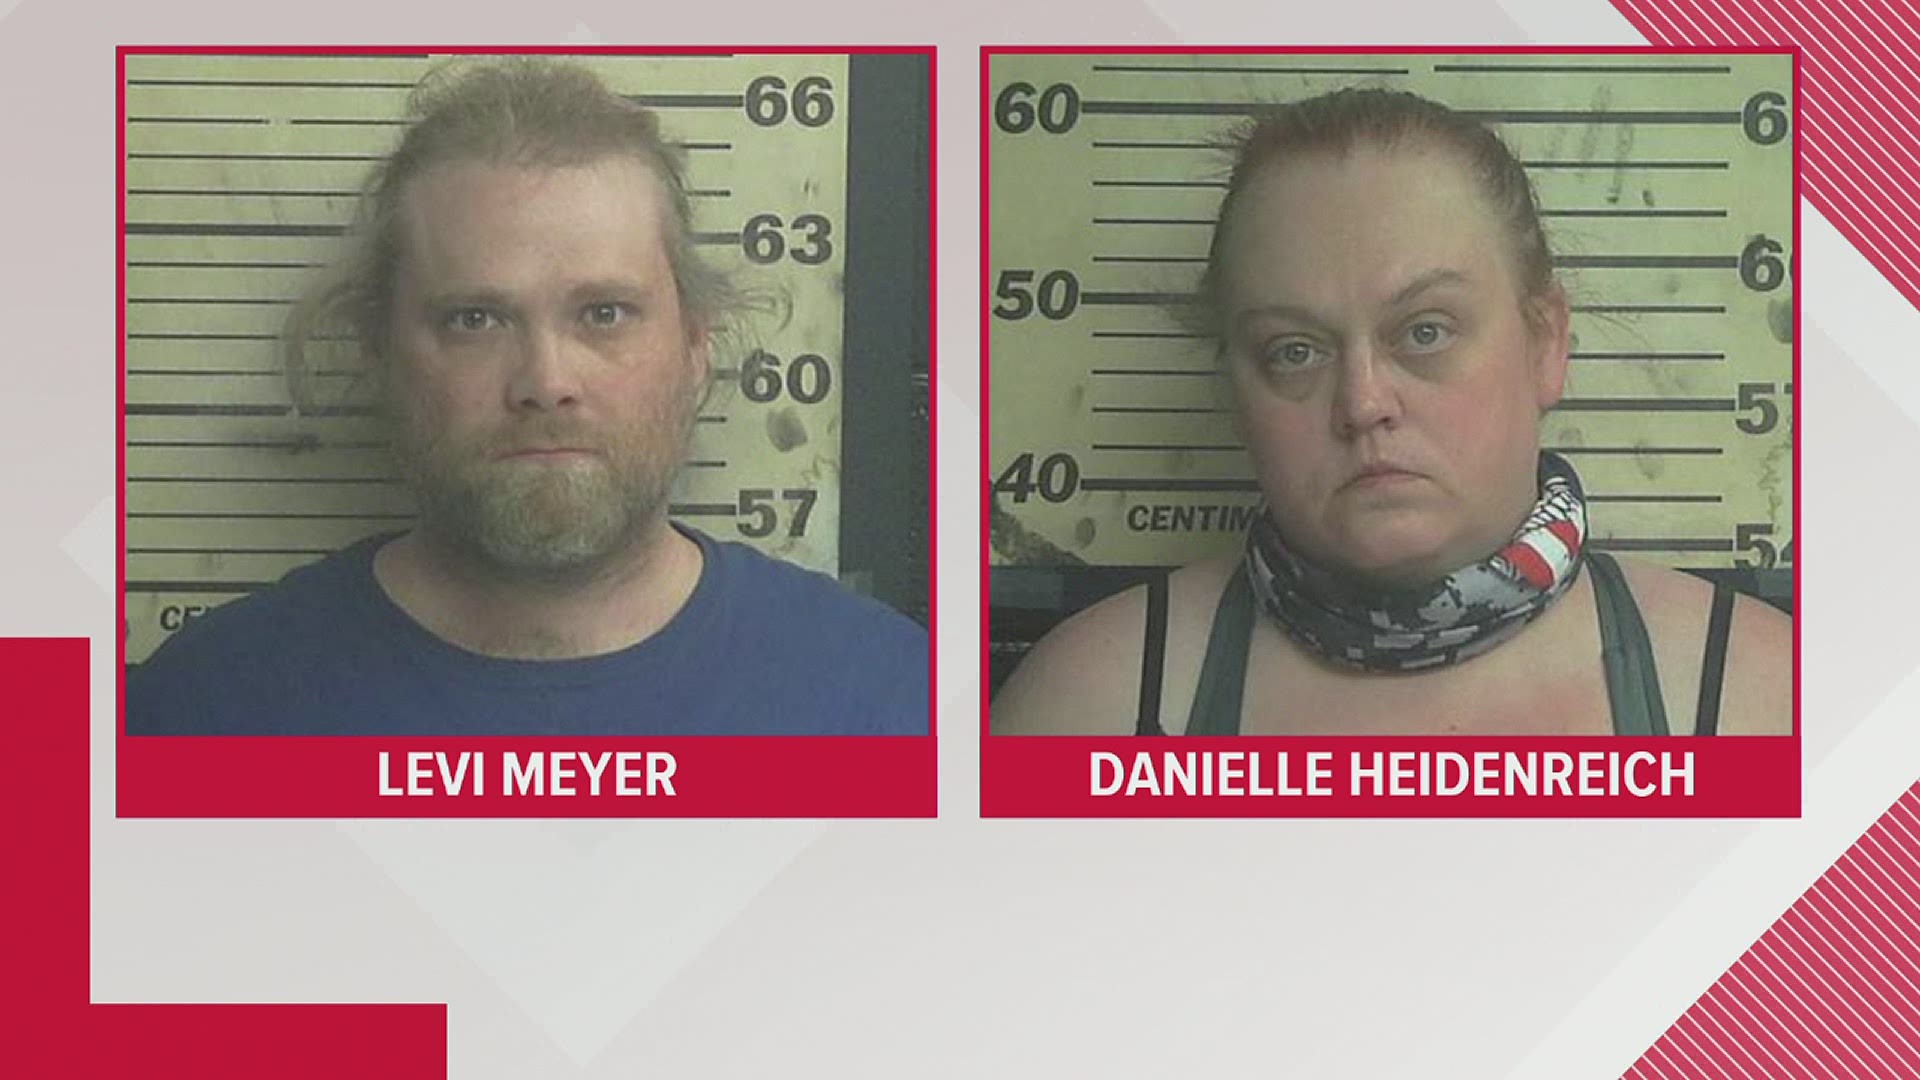 Police arrested Levi Meyer for First Degree murder of Keith Heidenreich and charge Danielle Heidenreich with concealment of homicidal death on Wednesday.